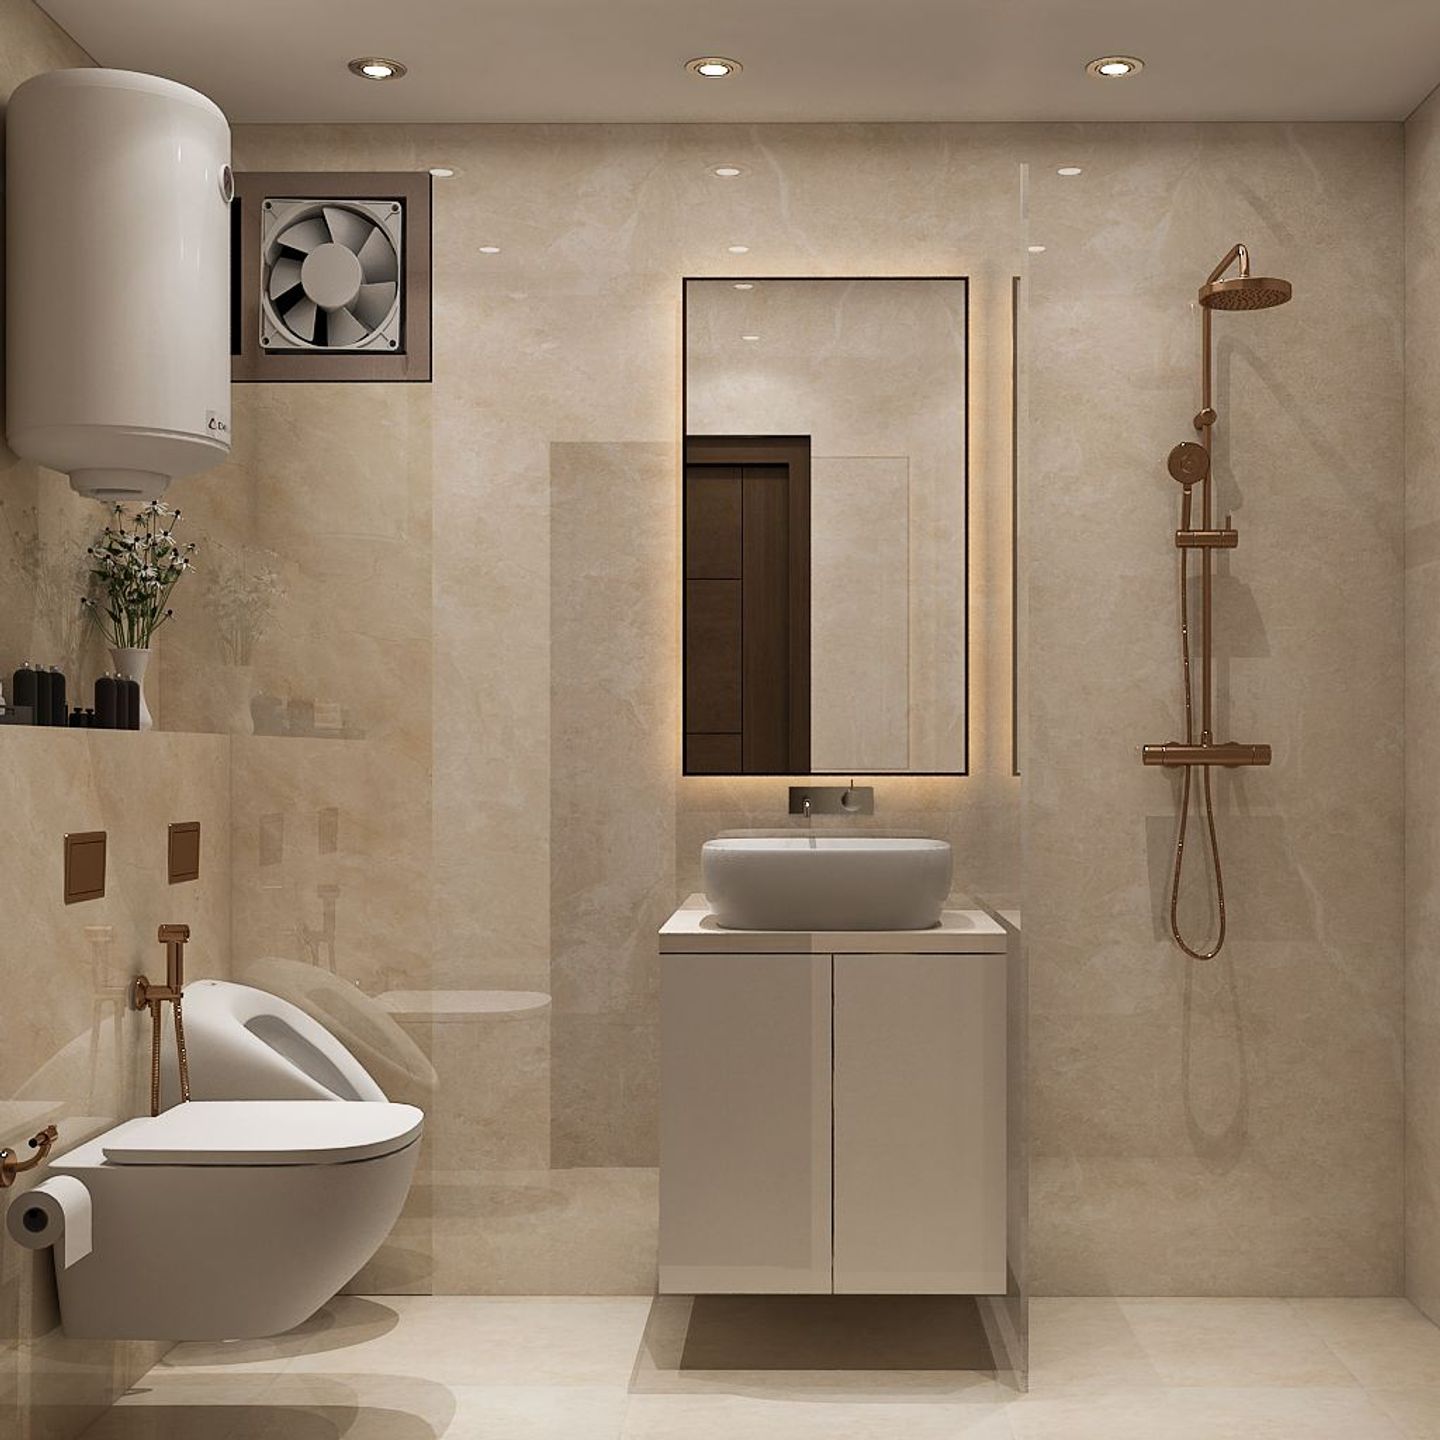 Spacious Small Bathroom Design Idea With Copper Sanitary Fittings ...